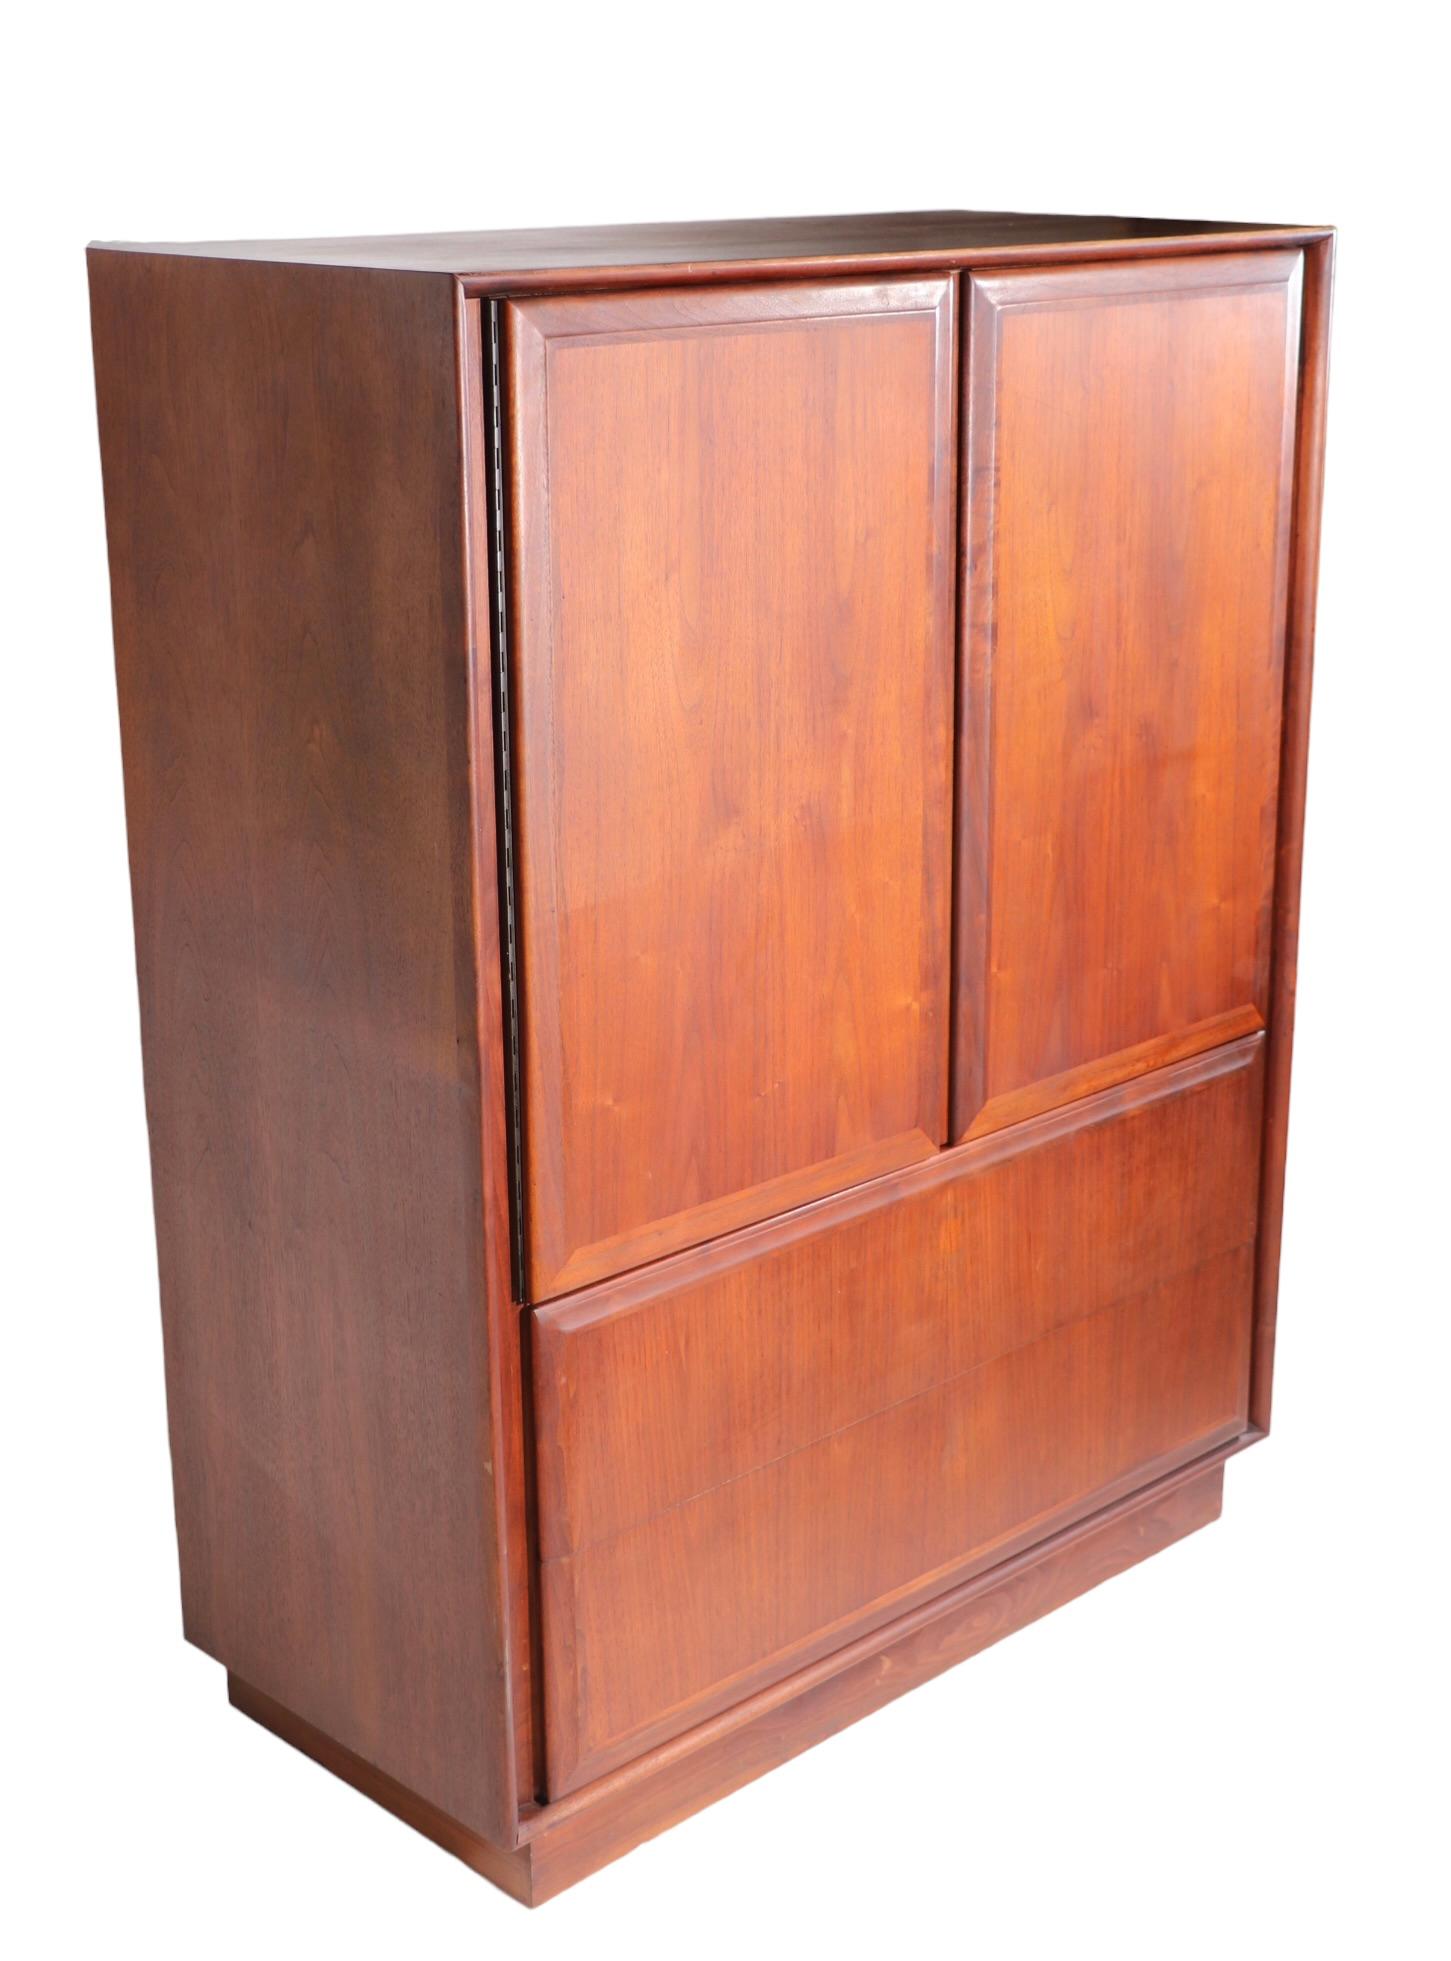 American Mid Century Chest Dresser Chifferobe by Dillingham att. to Baughman c 1960/1970s For Sale